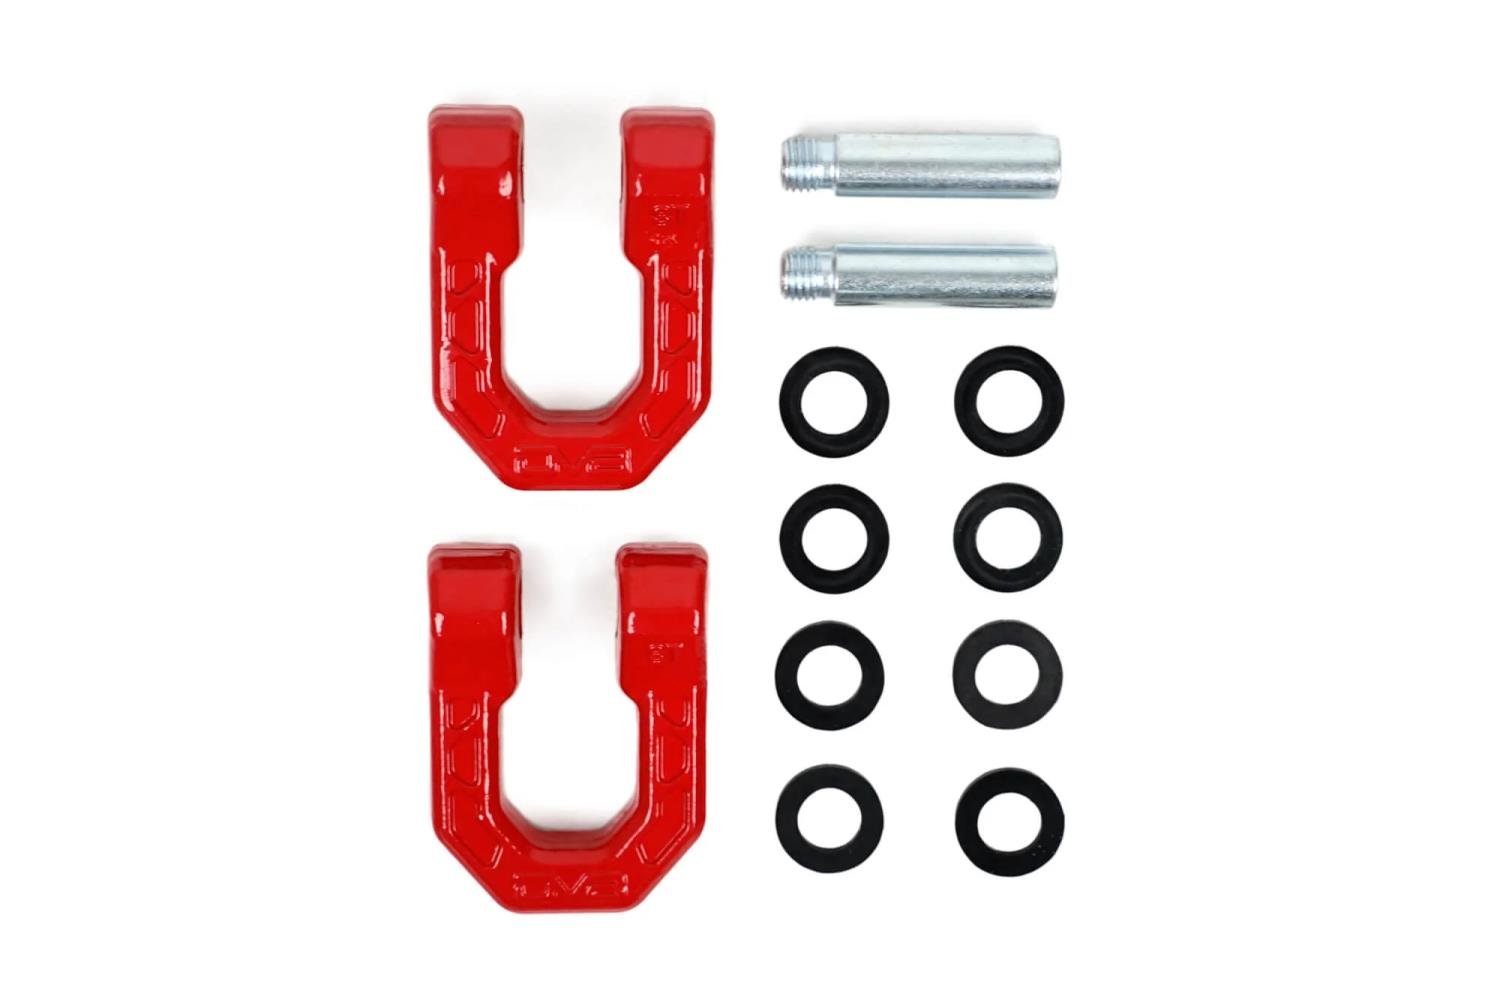 UNSK-01RD Elite Series 3/4 in. D-Ring Shackles [Red]